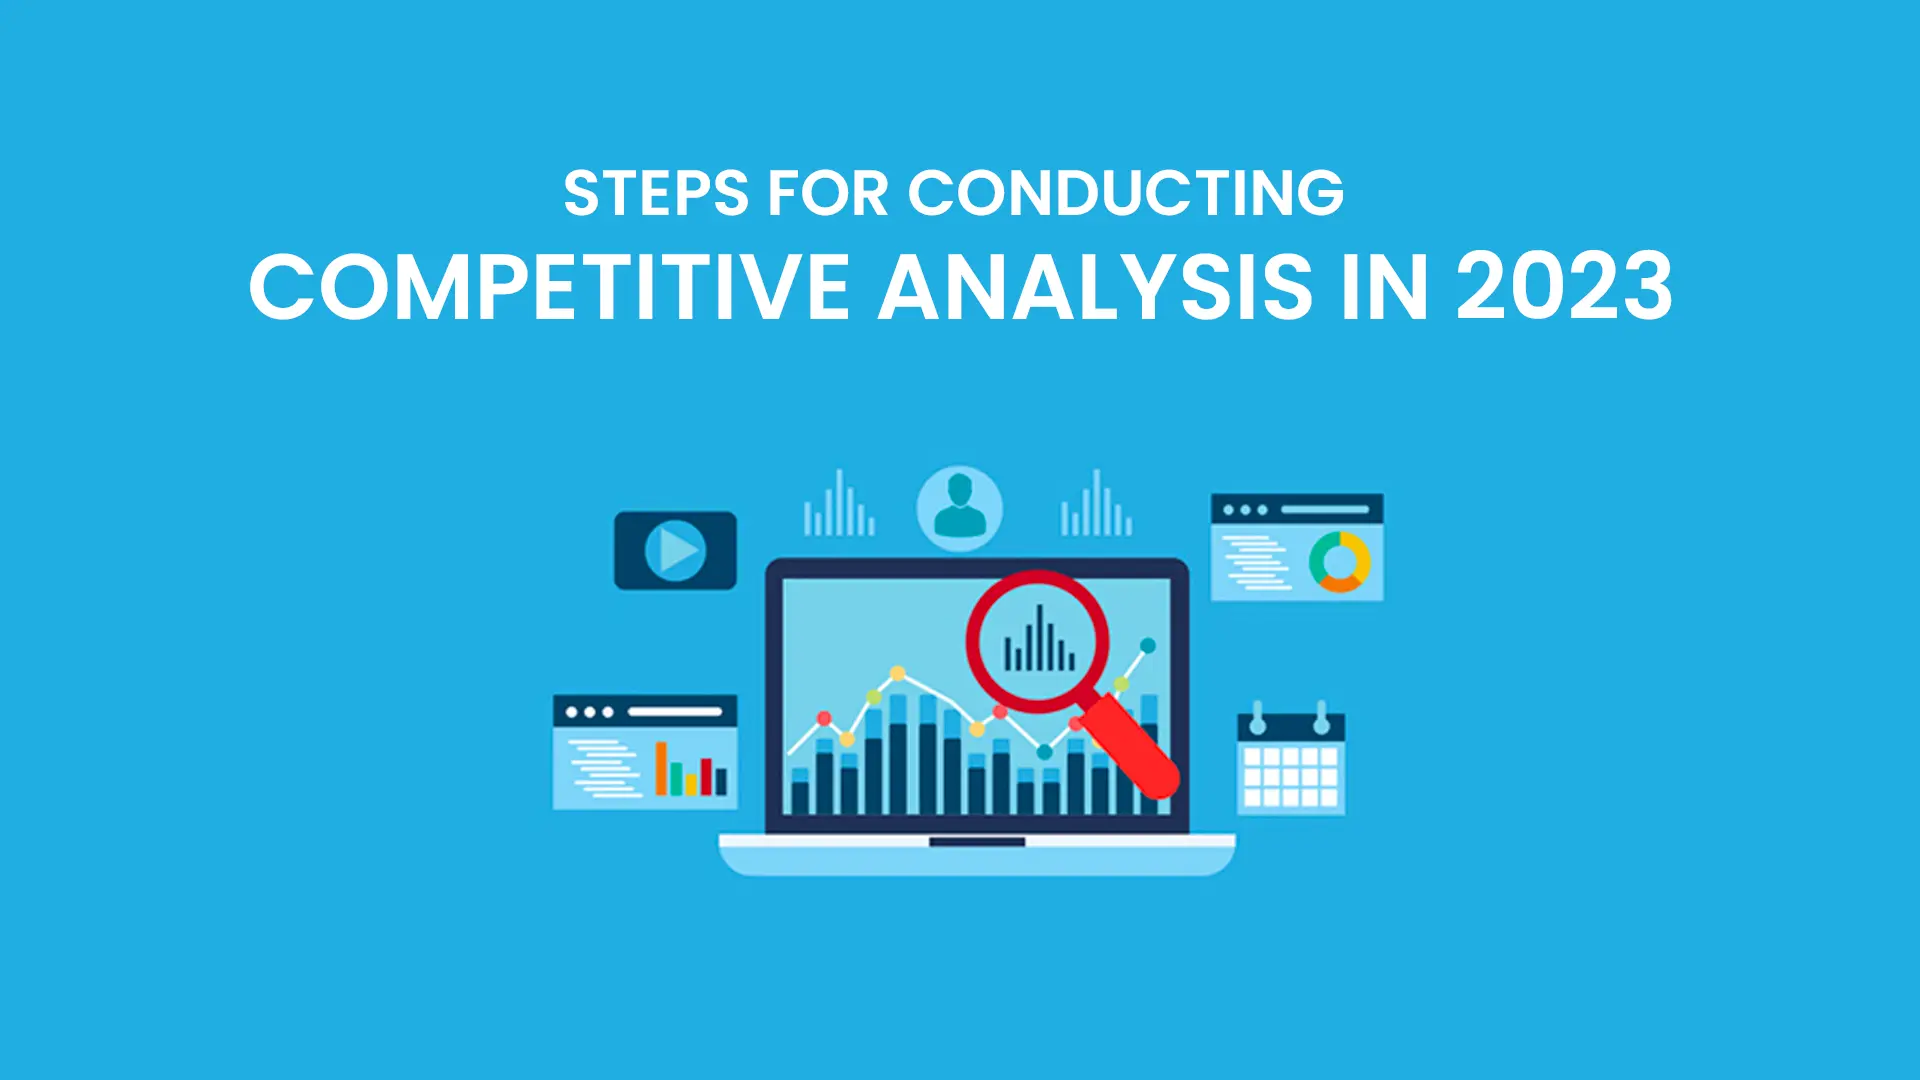 Steps For Conducting Competitive Analysis in 2023